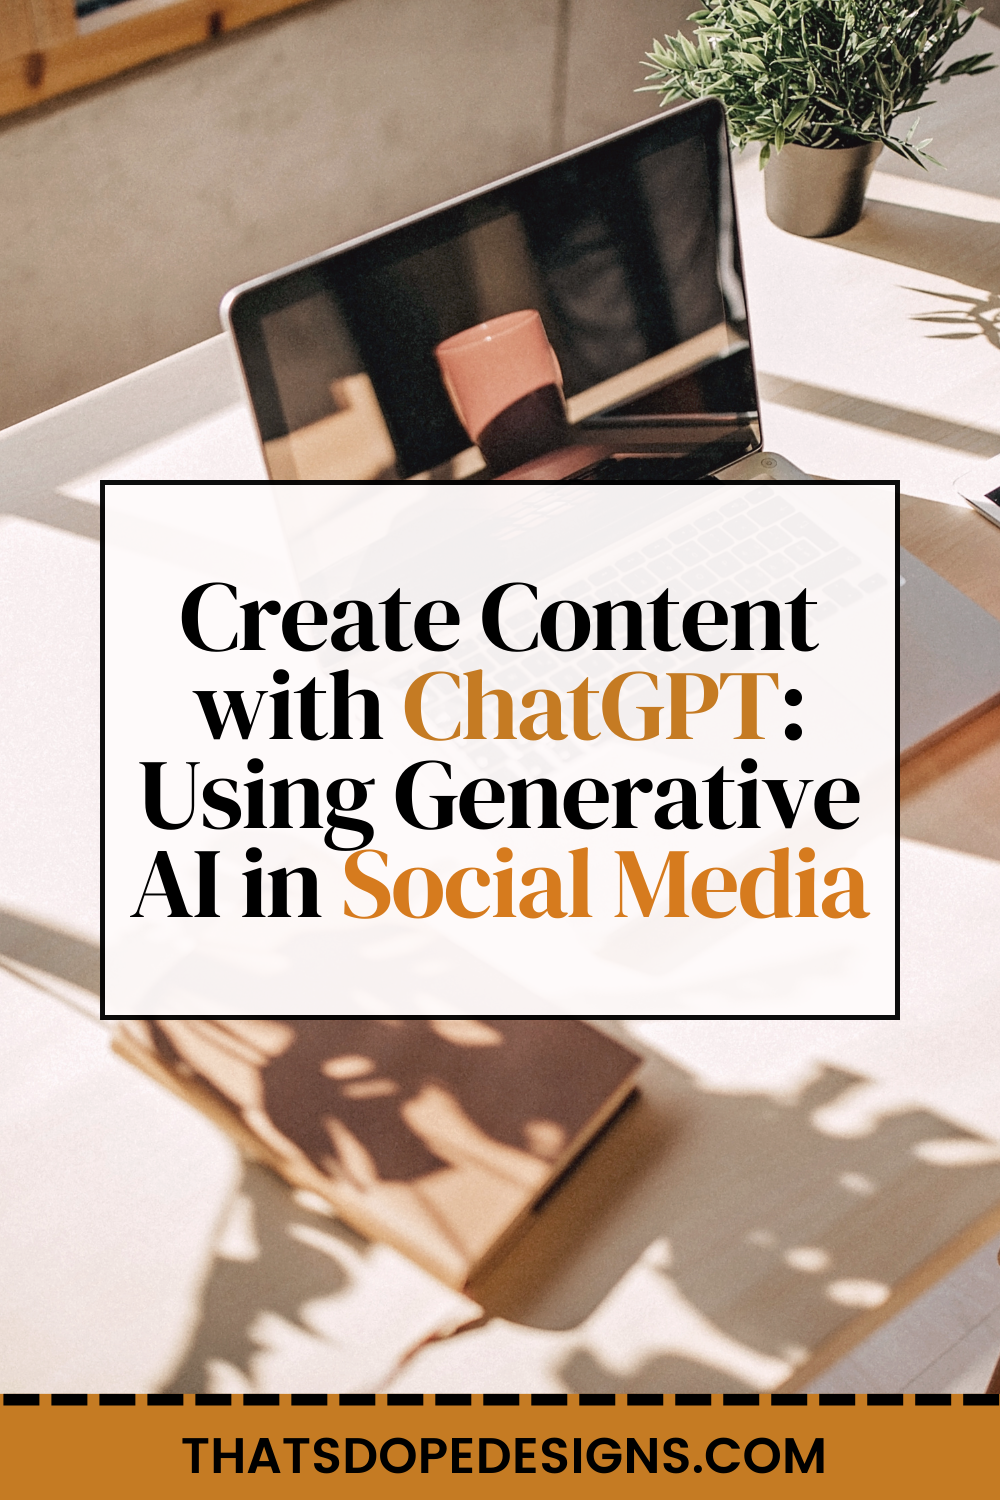 Create Content with CHatGPT: Using Generative AI in Social Media